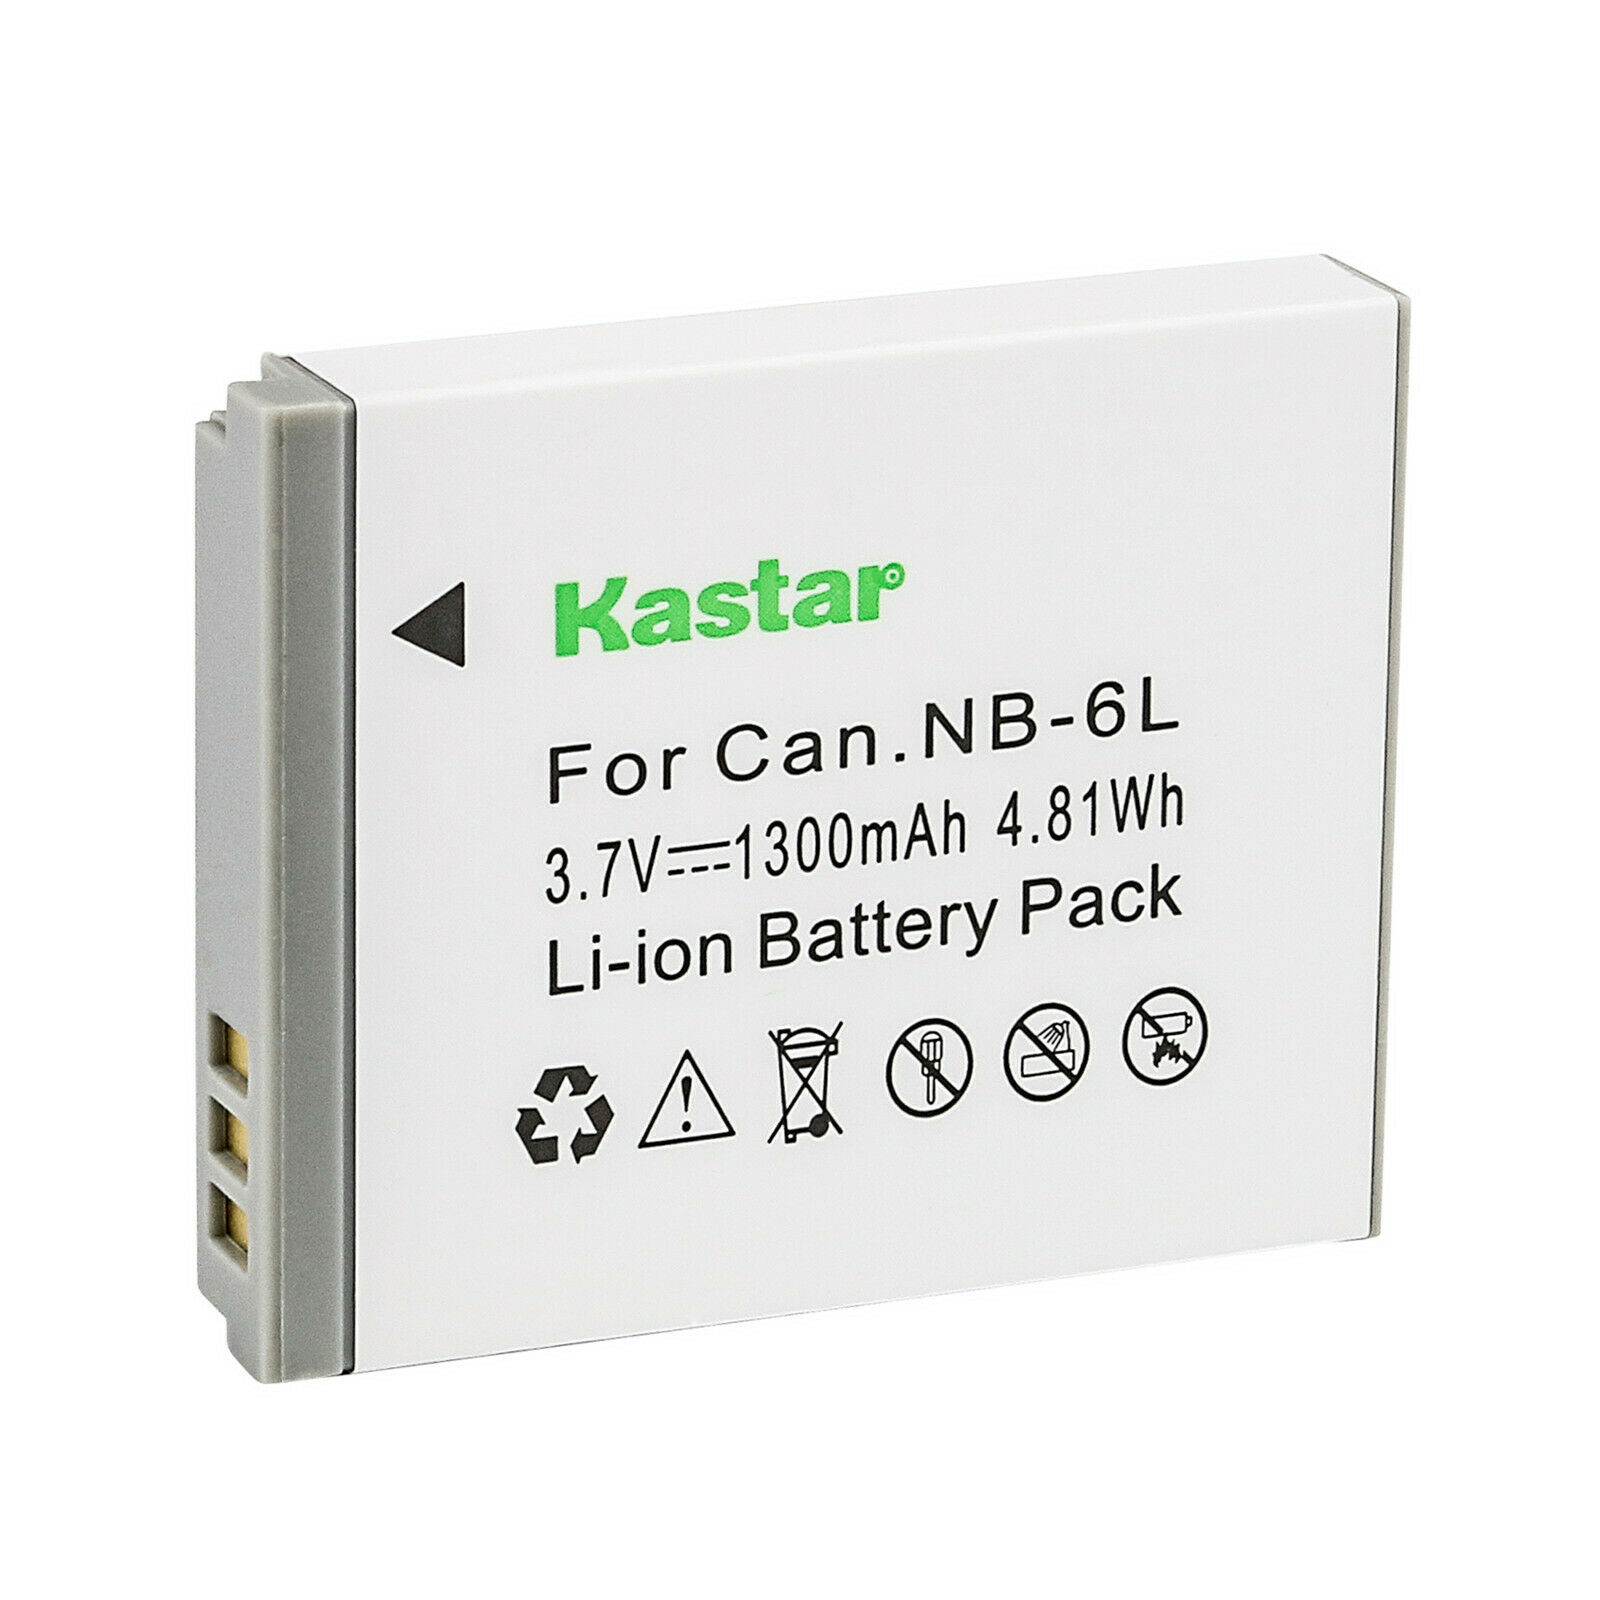 Kastar 1-Pack NB-6L Battery 3.7V 1300mAh Replacement for Canon PowerShot SX530 HS, SX540 HS, SX600 HS, SX610 HS, SX700 HS, SX710 HS Camera - image 1 of 3